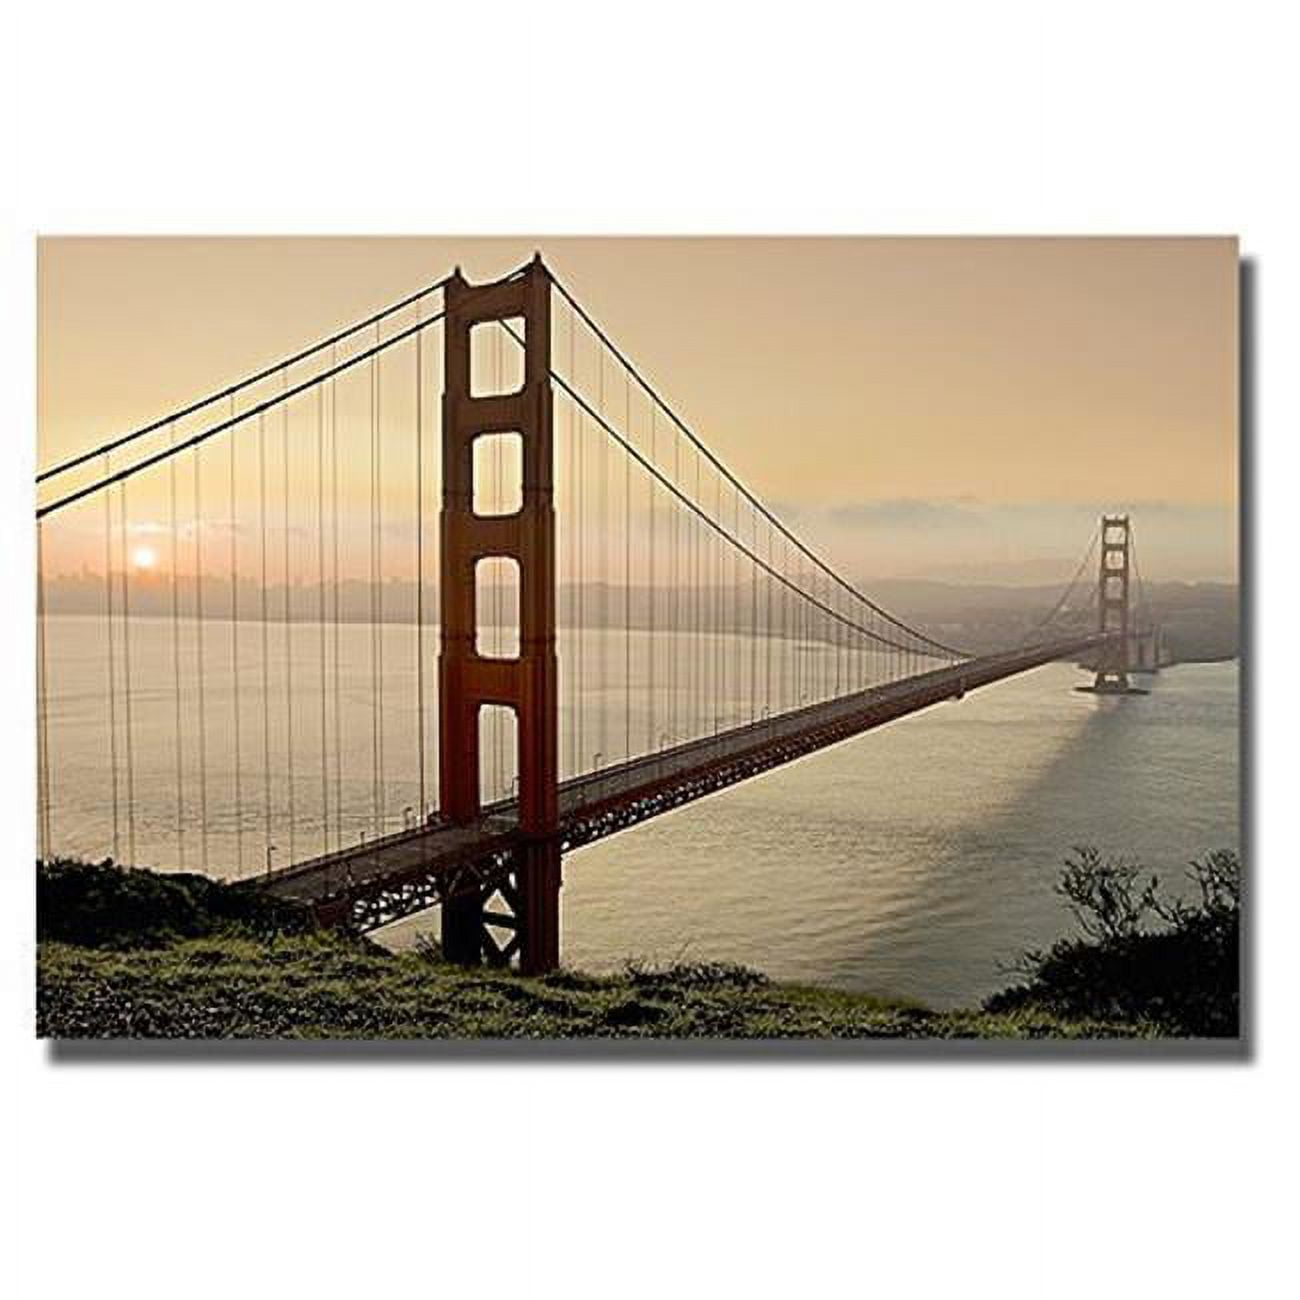 2436y884ig Golden Gate Sunrise No 2 By Alan Blaustein Premium Gallery-wrapped Canvas Giclee Art - Ready-to-hang, 24 X 36 X 1.5 In.